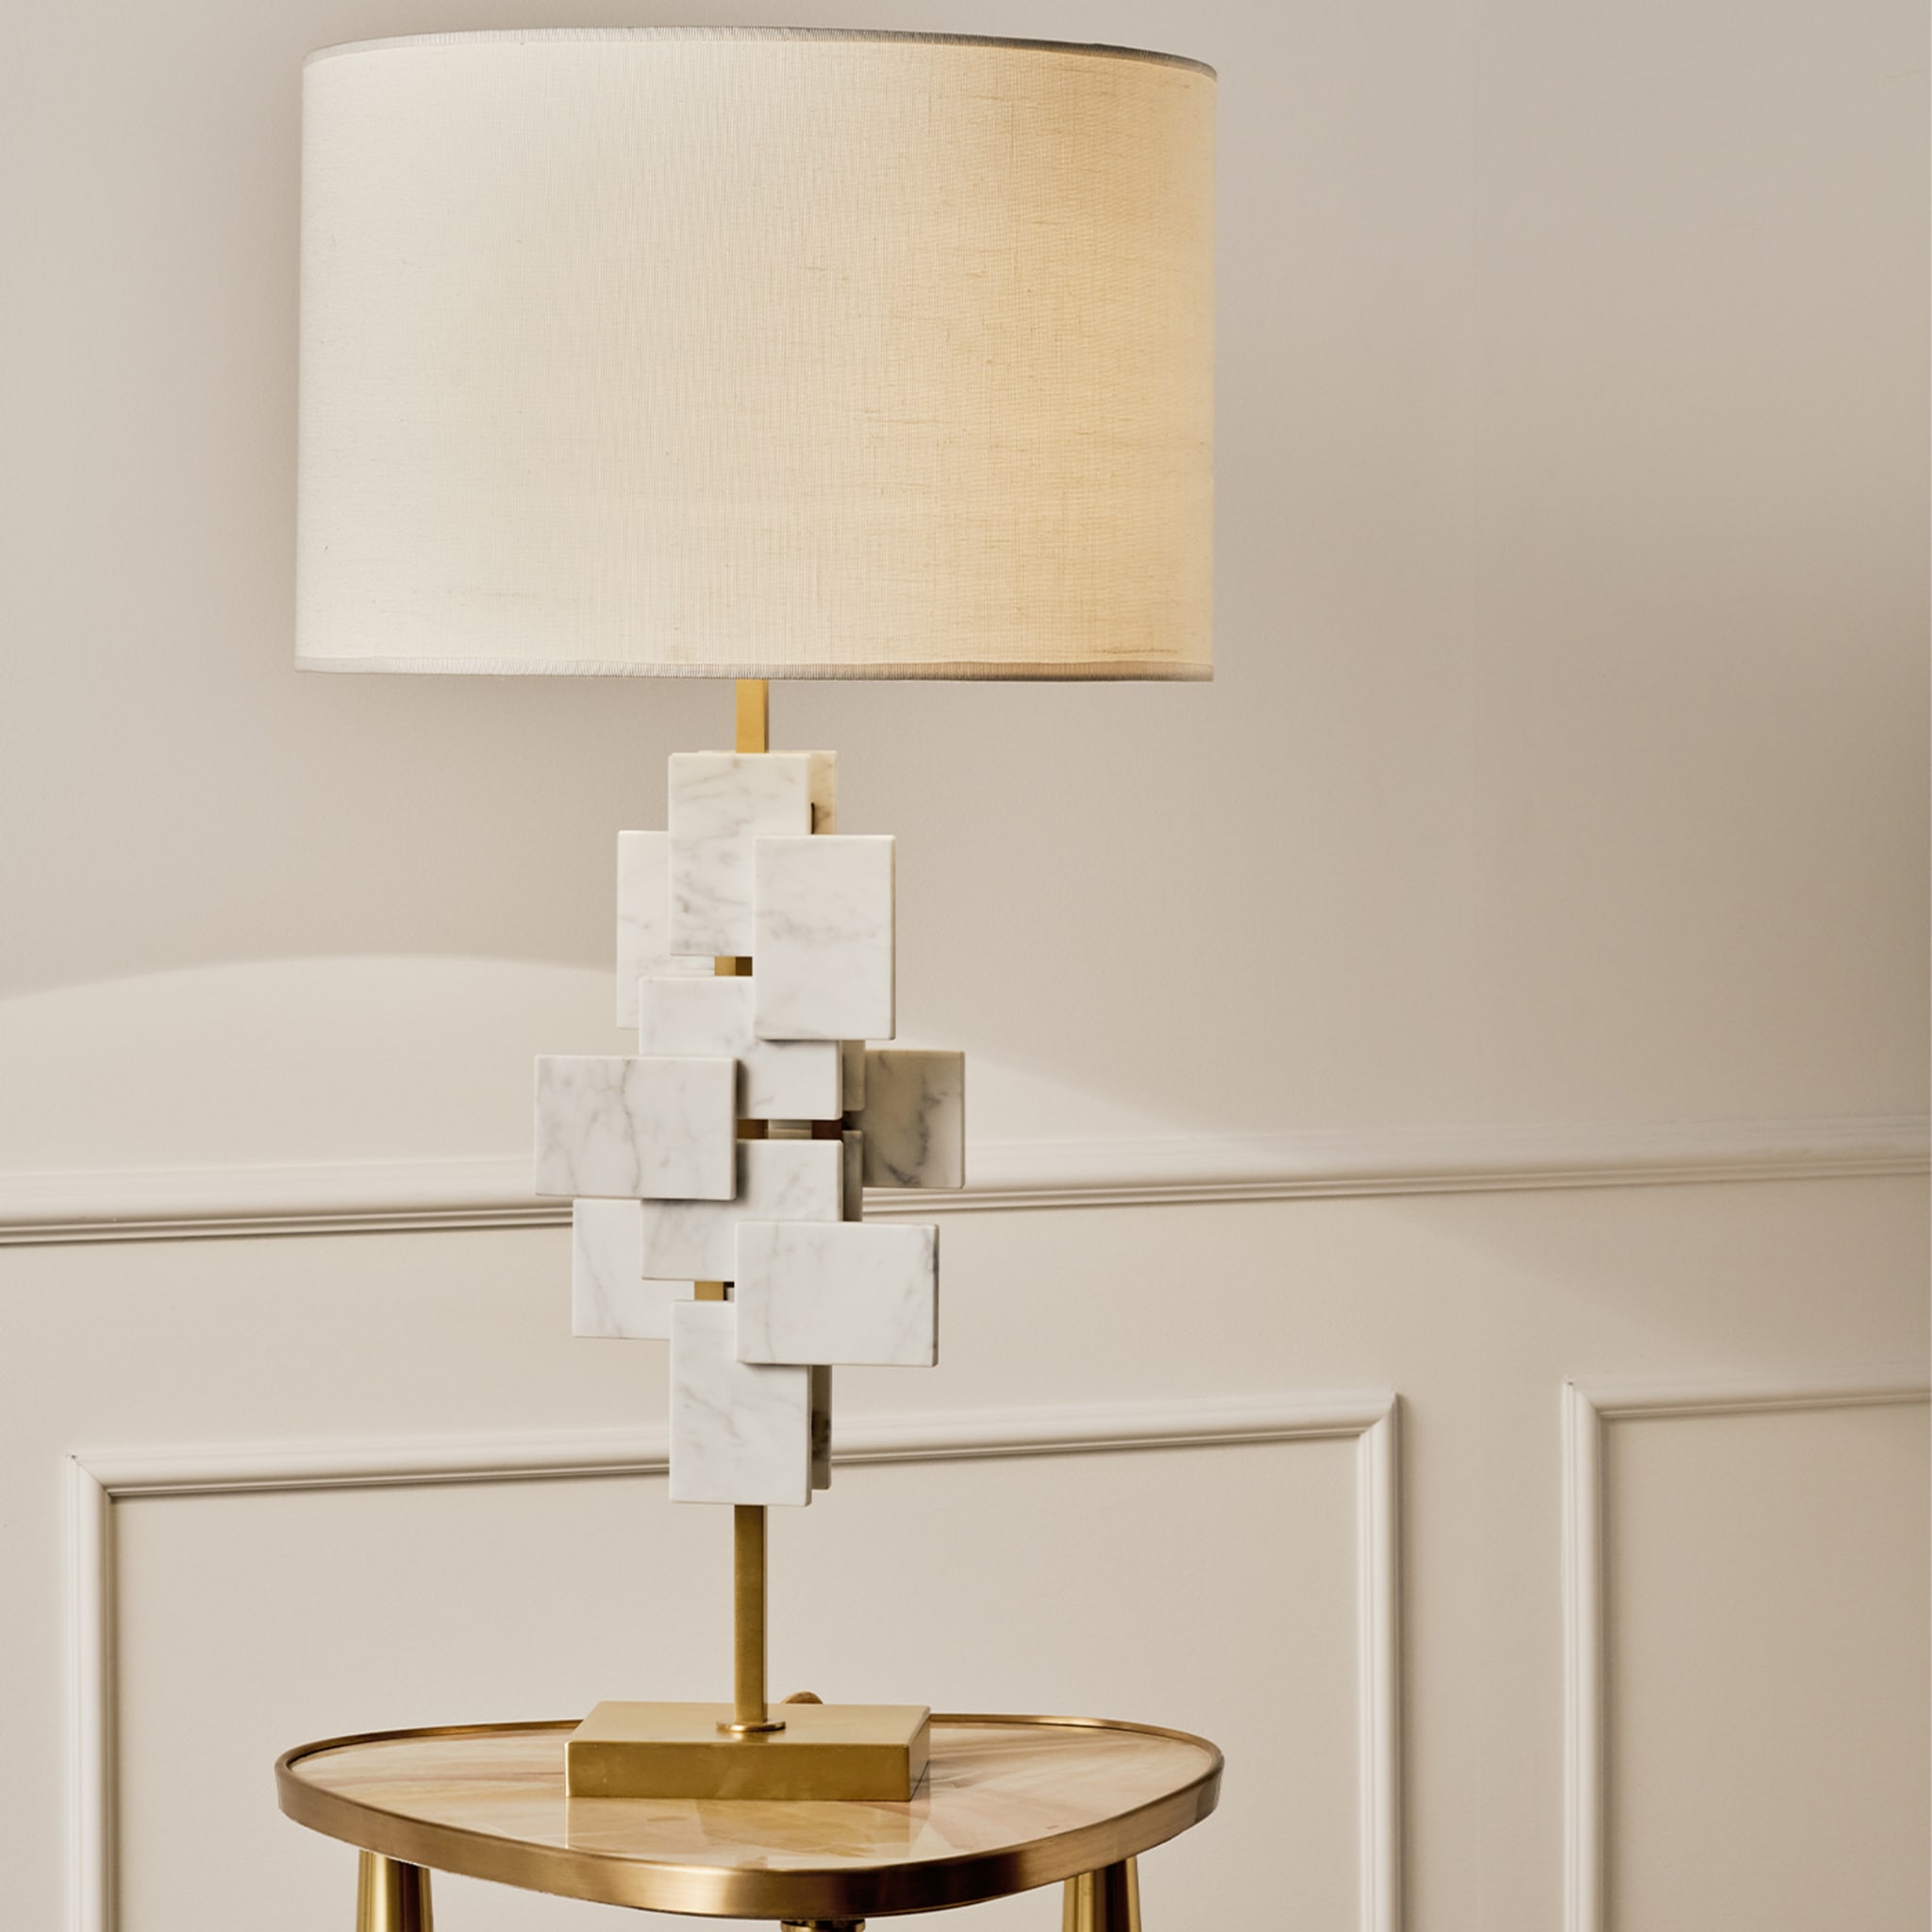 "Tiles" Table Lamp in Carrara Marble and Satin Brass - Alternative view 3